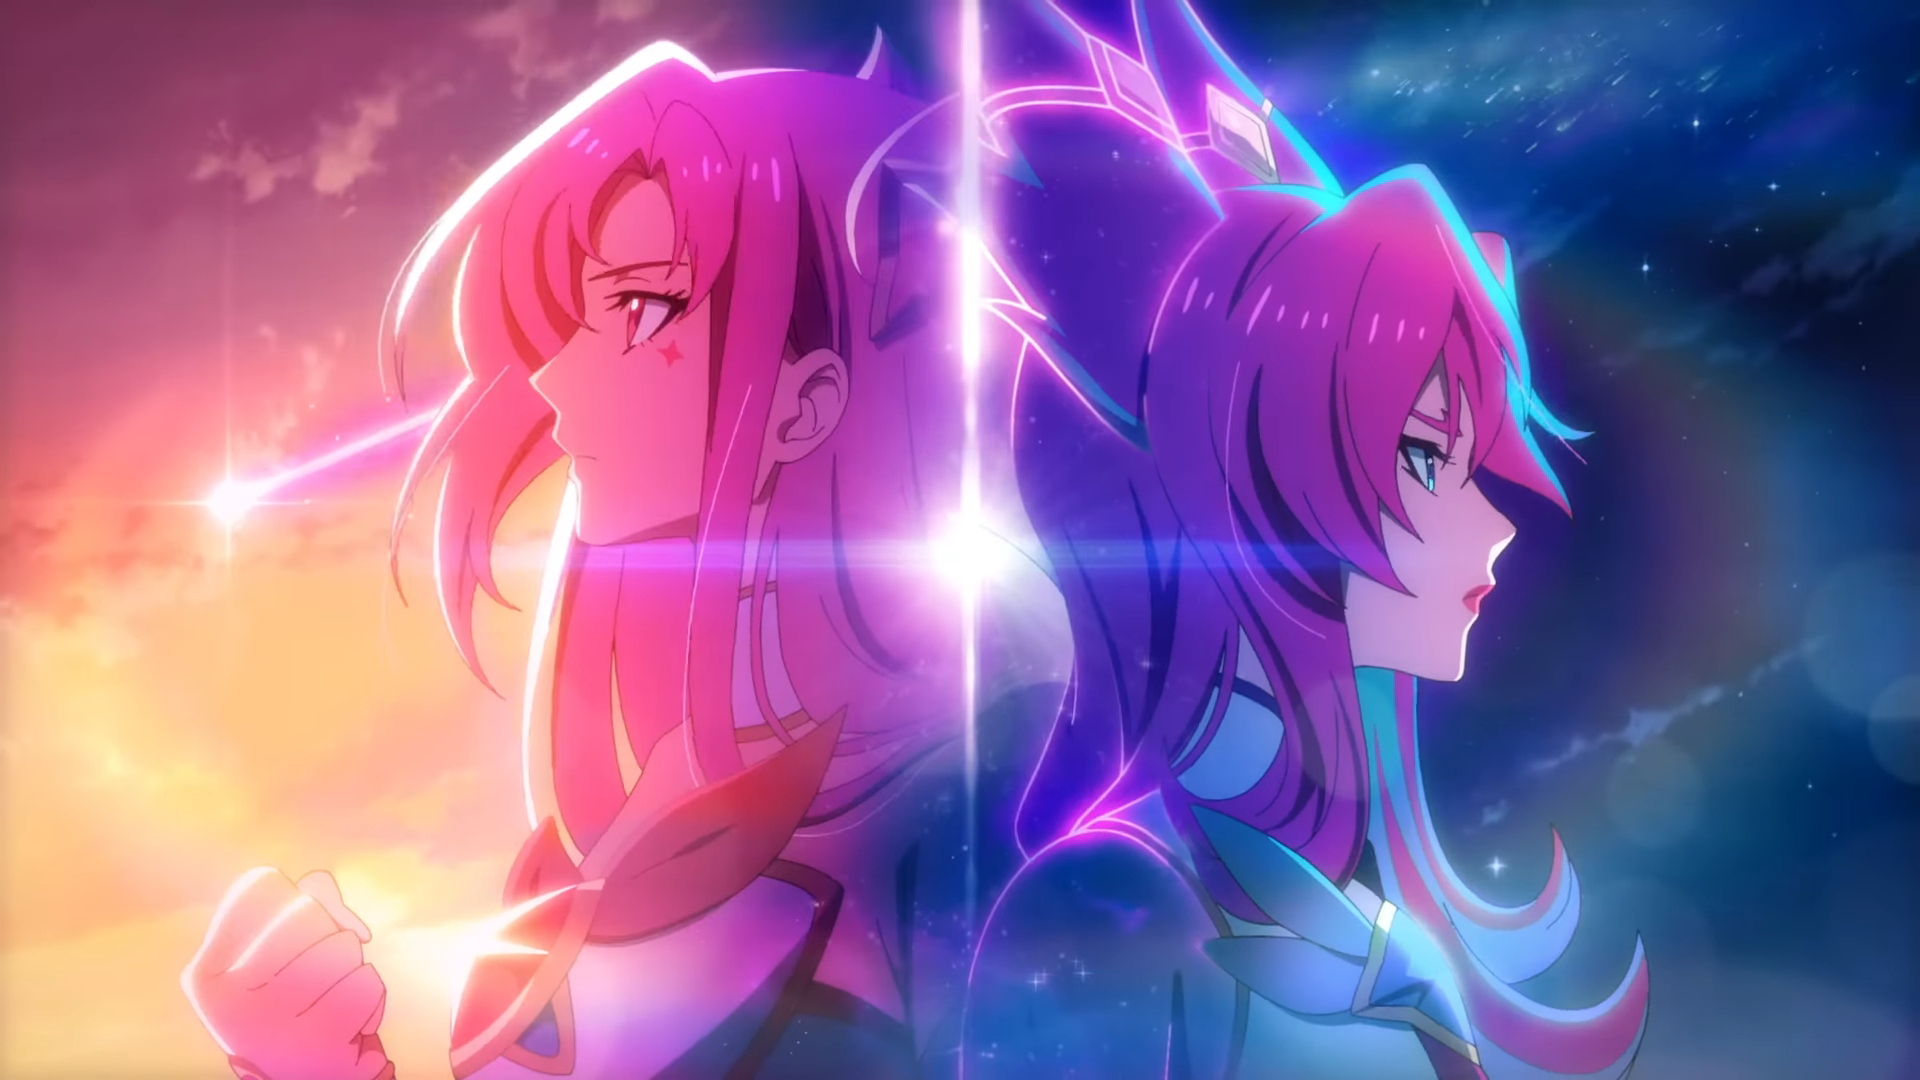 League of Legends Releases Animated Music Video for Star Guardian Theme Song  - Anime Corner